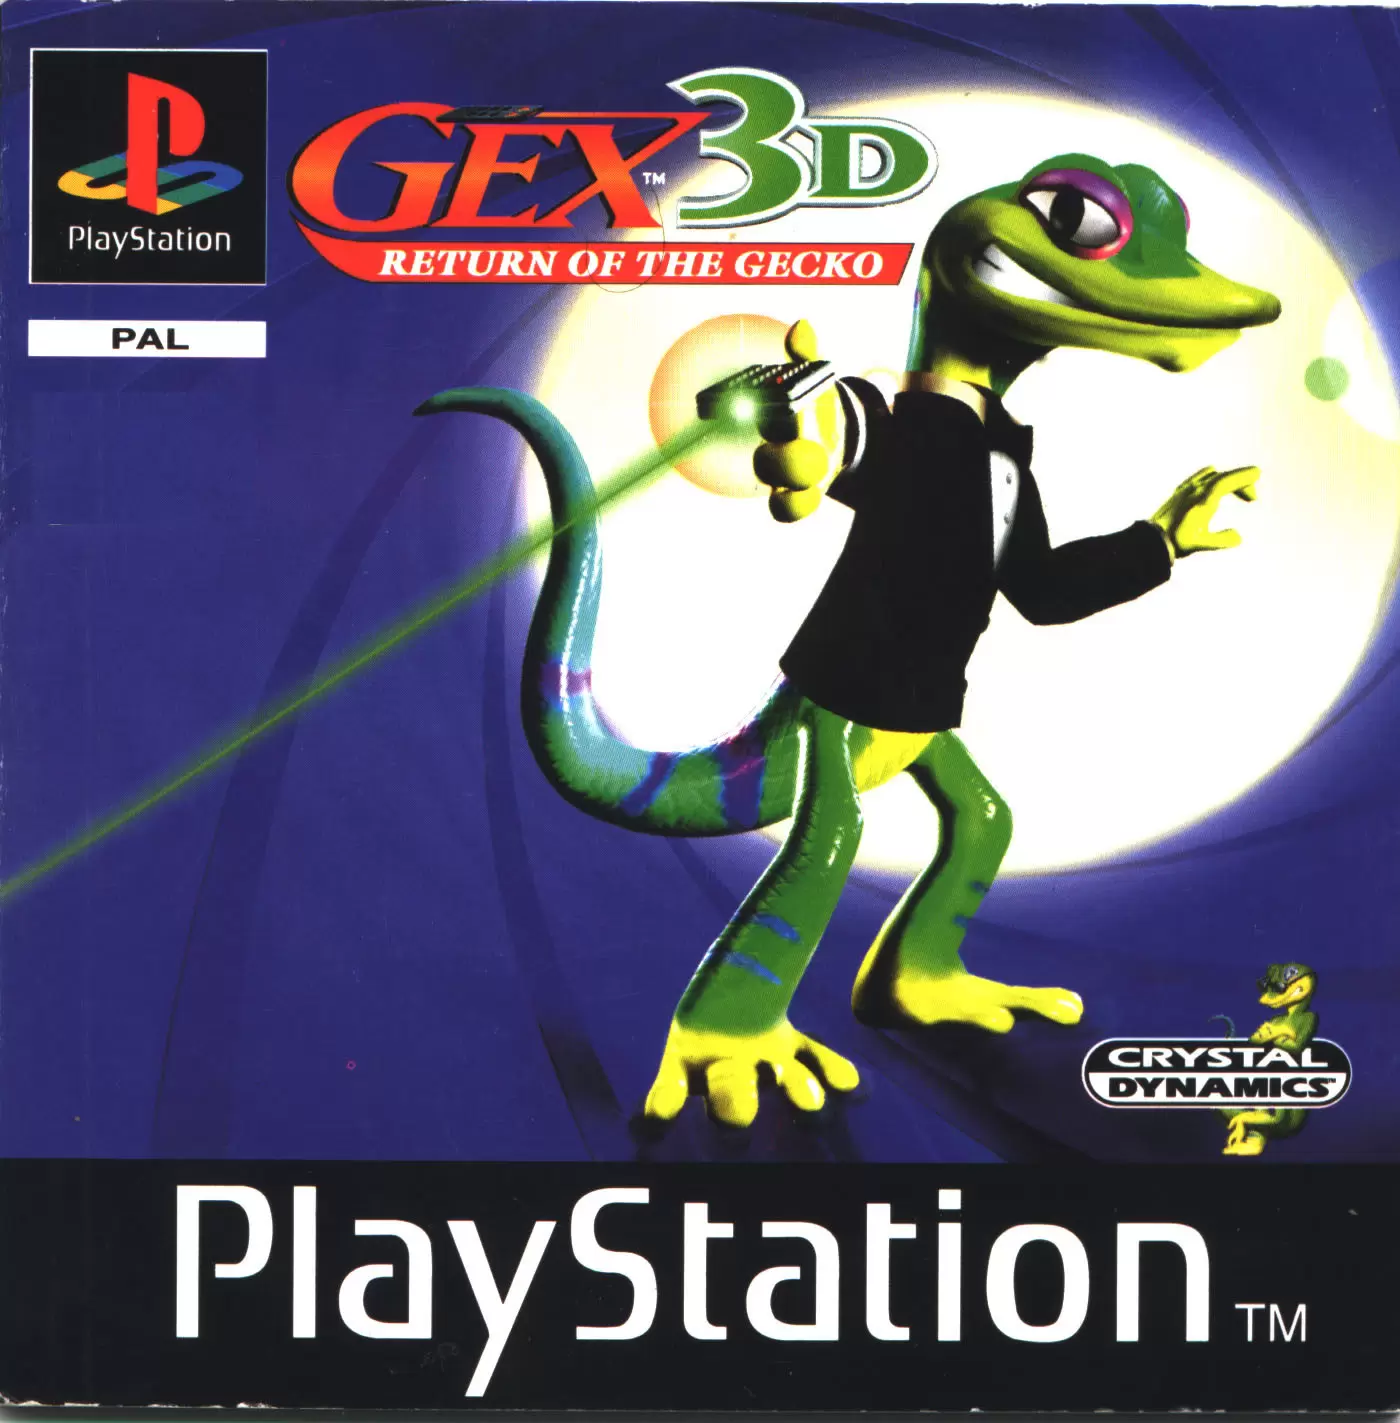 Playstation games - Gex: Return of the Gecko